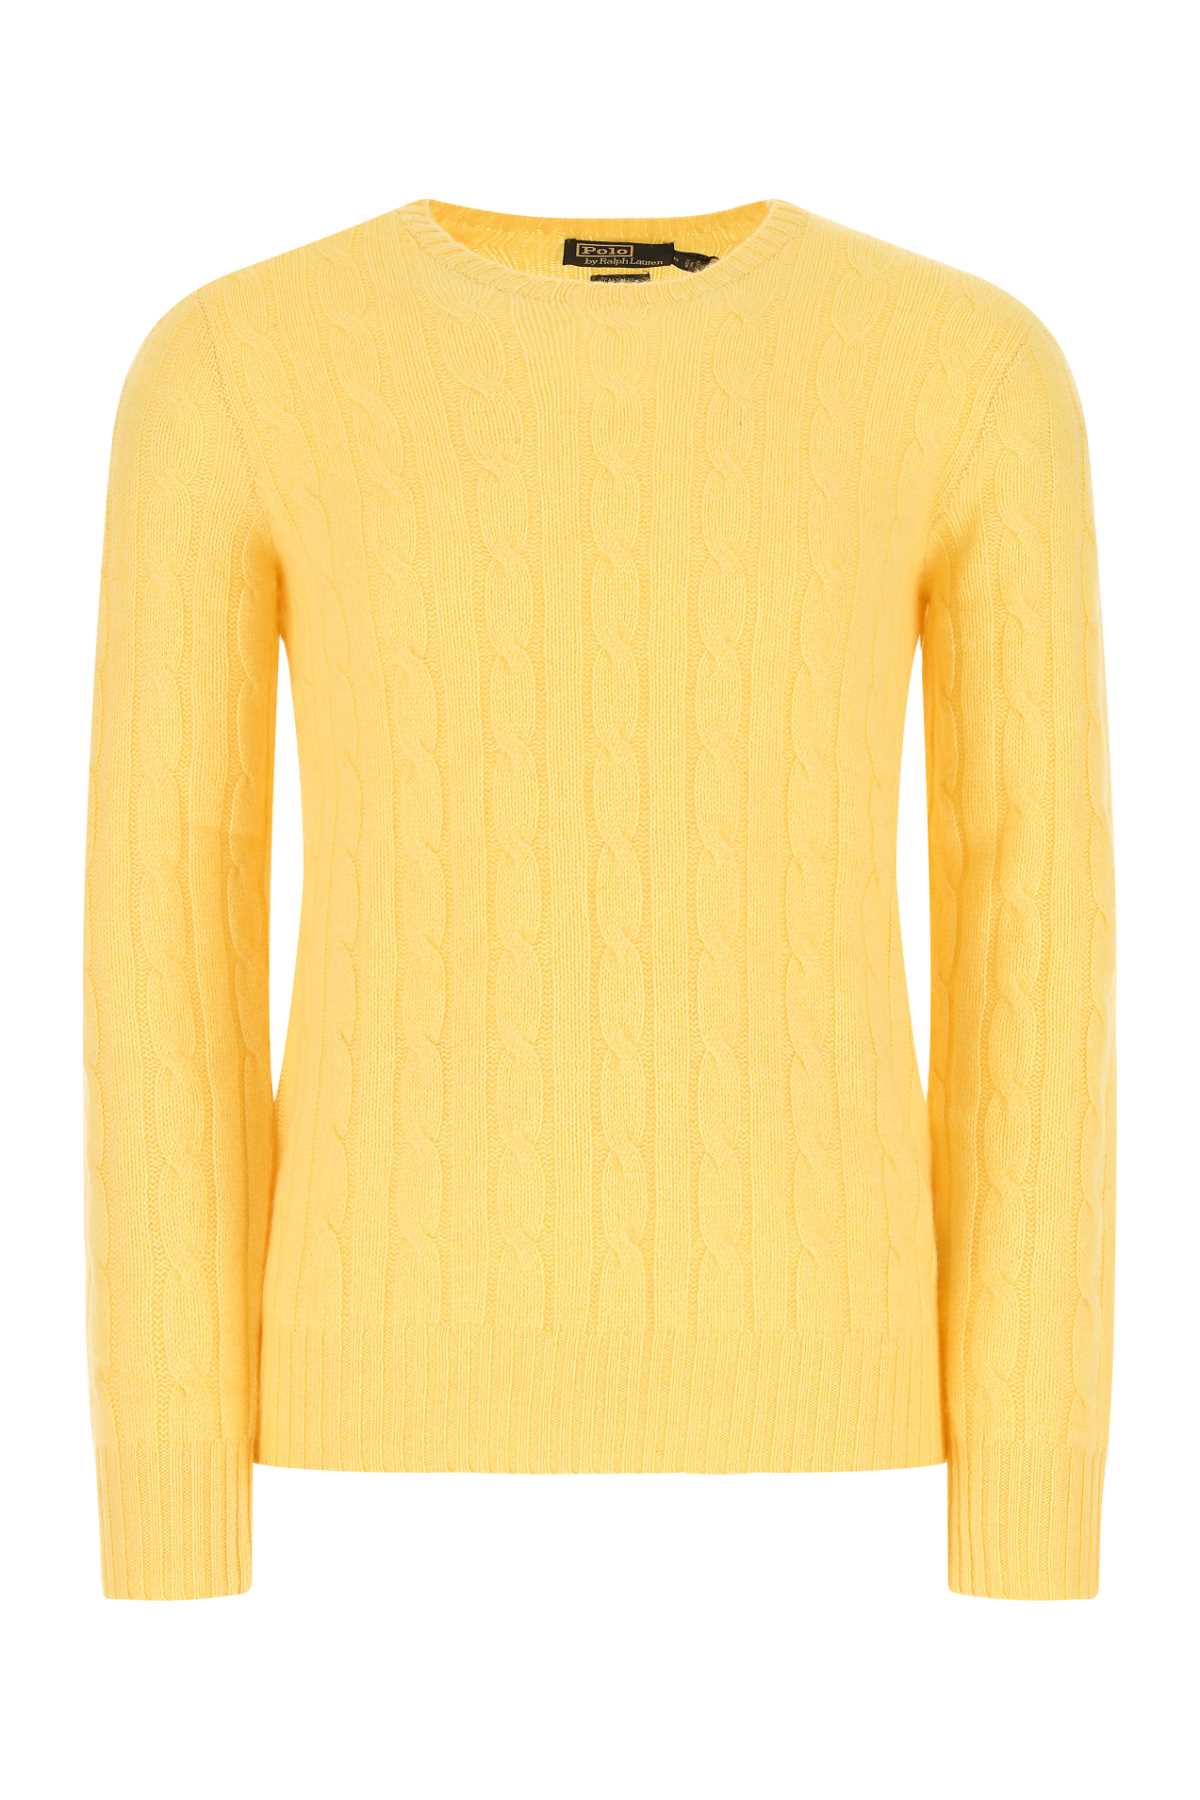 Shop Polo Ralph Lauren Yellow Cashmere Sweater In 002